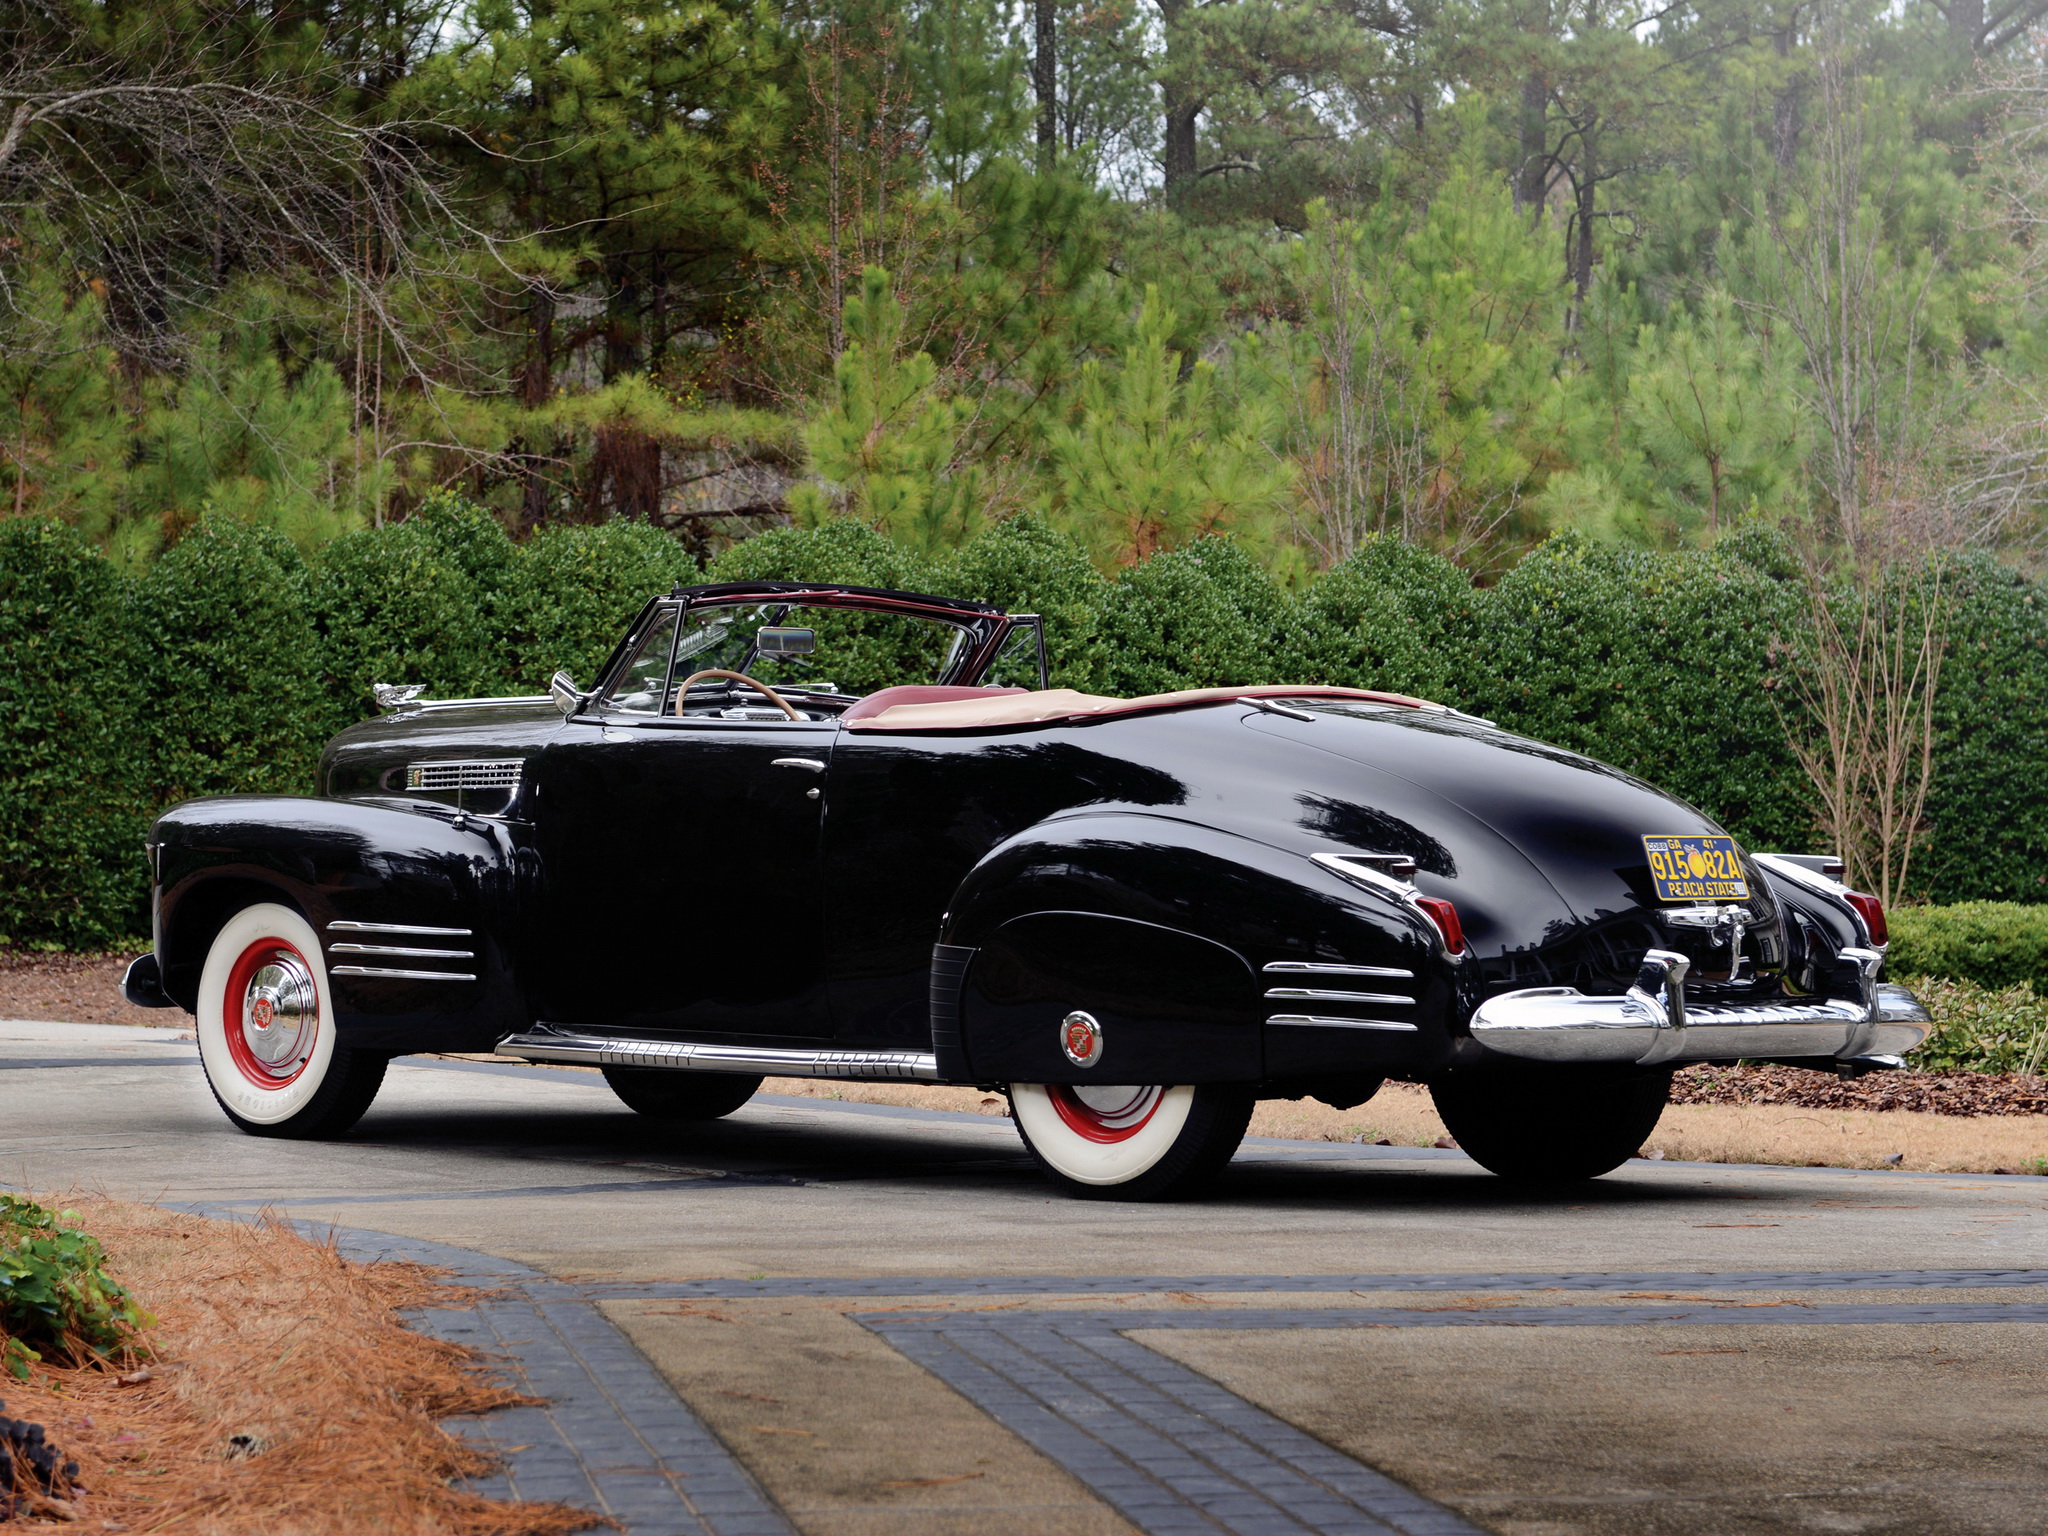 1941, Cadillac, Sixty two, Convertible, Coupe, Luxury, Retro, Gd Wallpaper